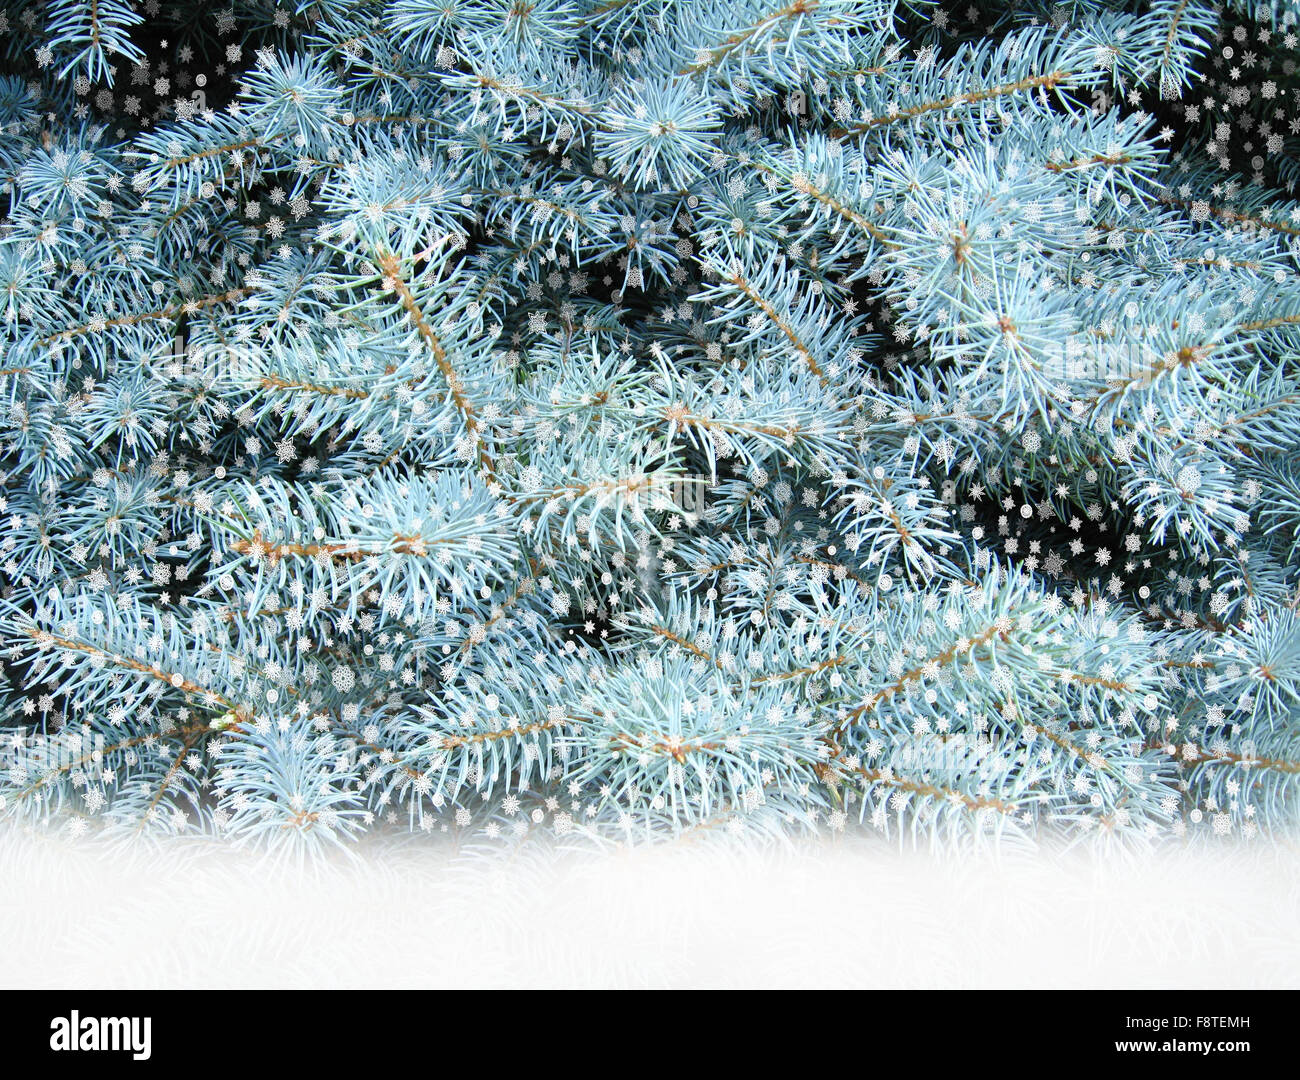 harmonious fur-tree with falling snowflakes from above Stock Photo